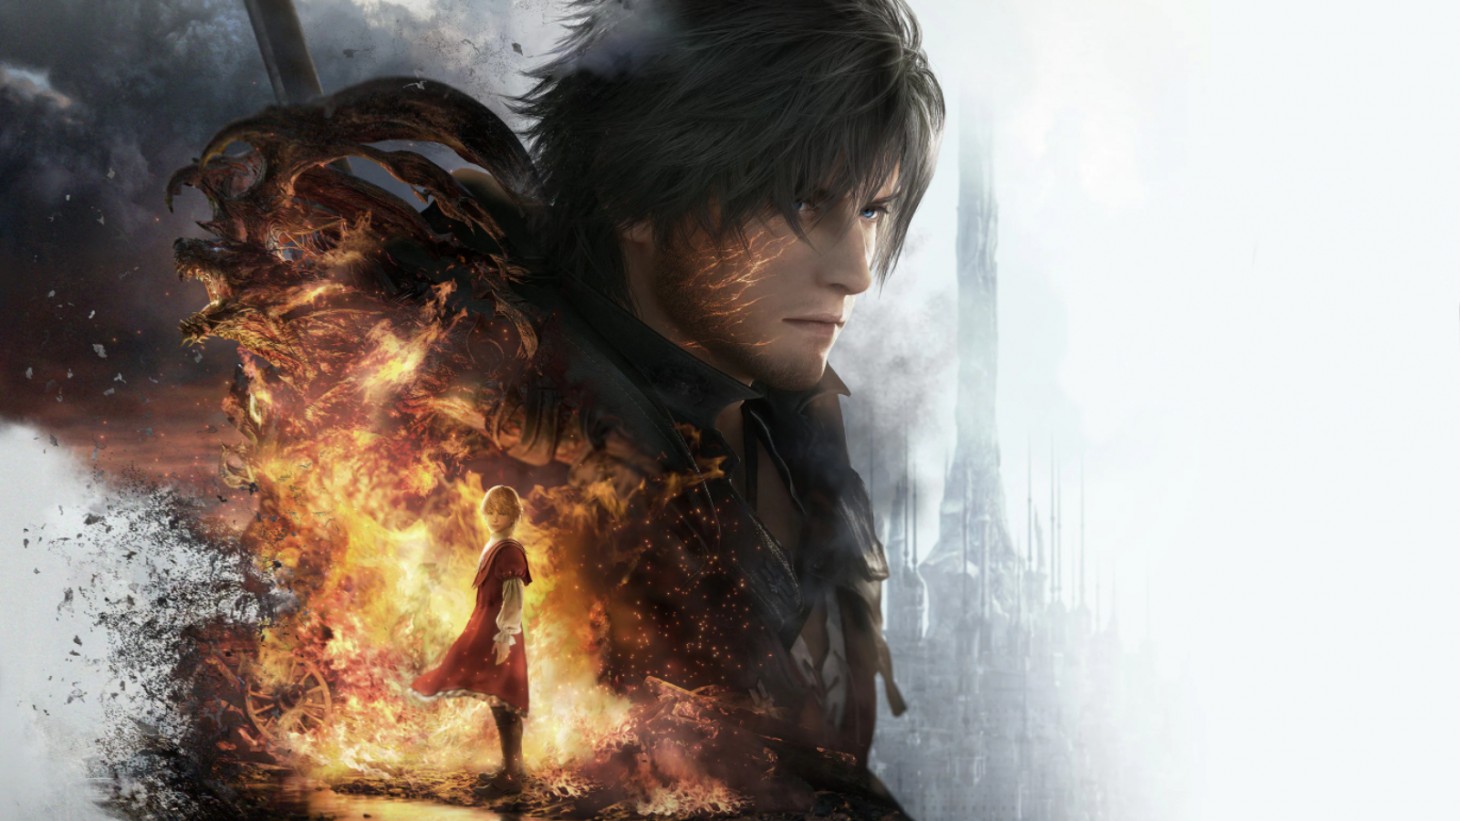 PlayStation State of Play zeigt neues Final Fantasy 16-Gameplay